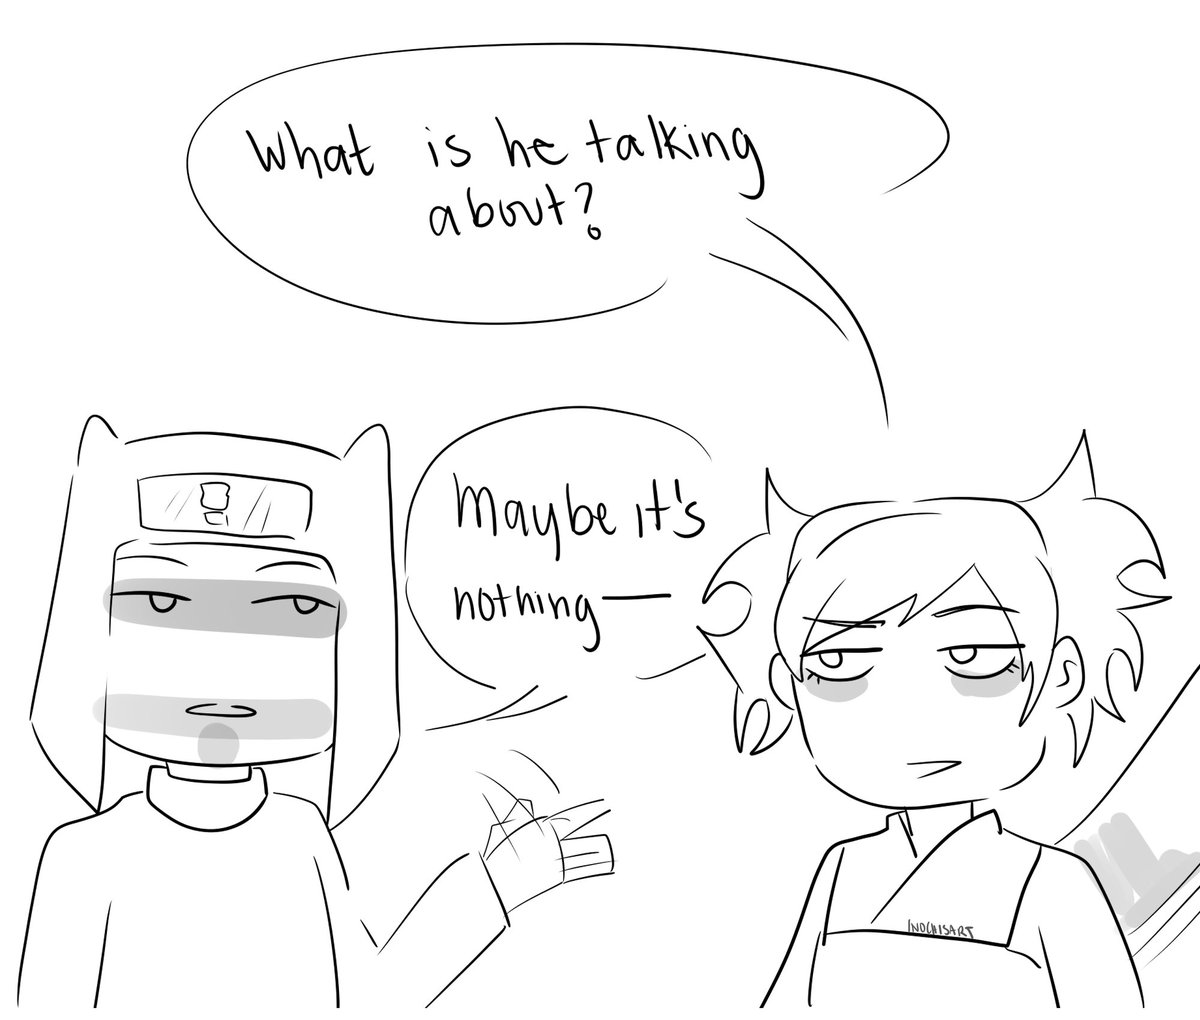 I kept giggling like a maniac i cant help it guys
#NARUTO #sandsiblings 